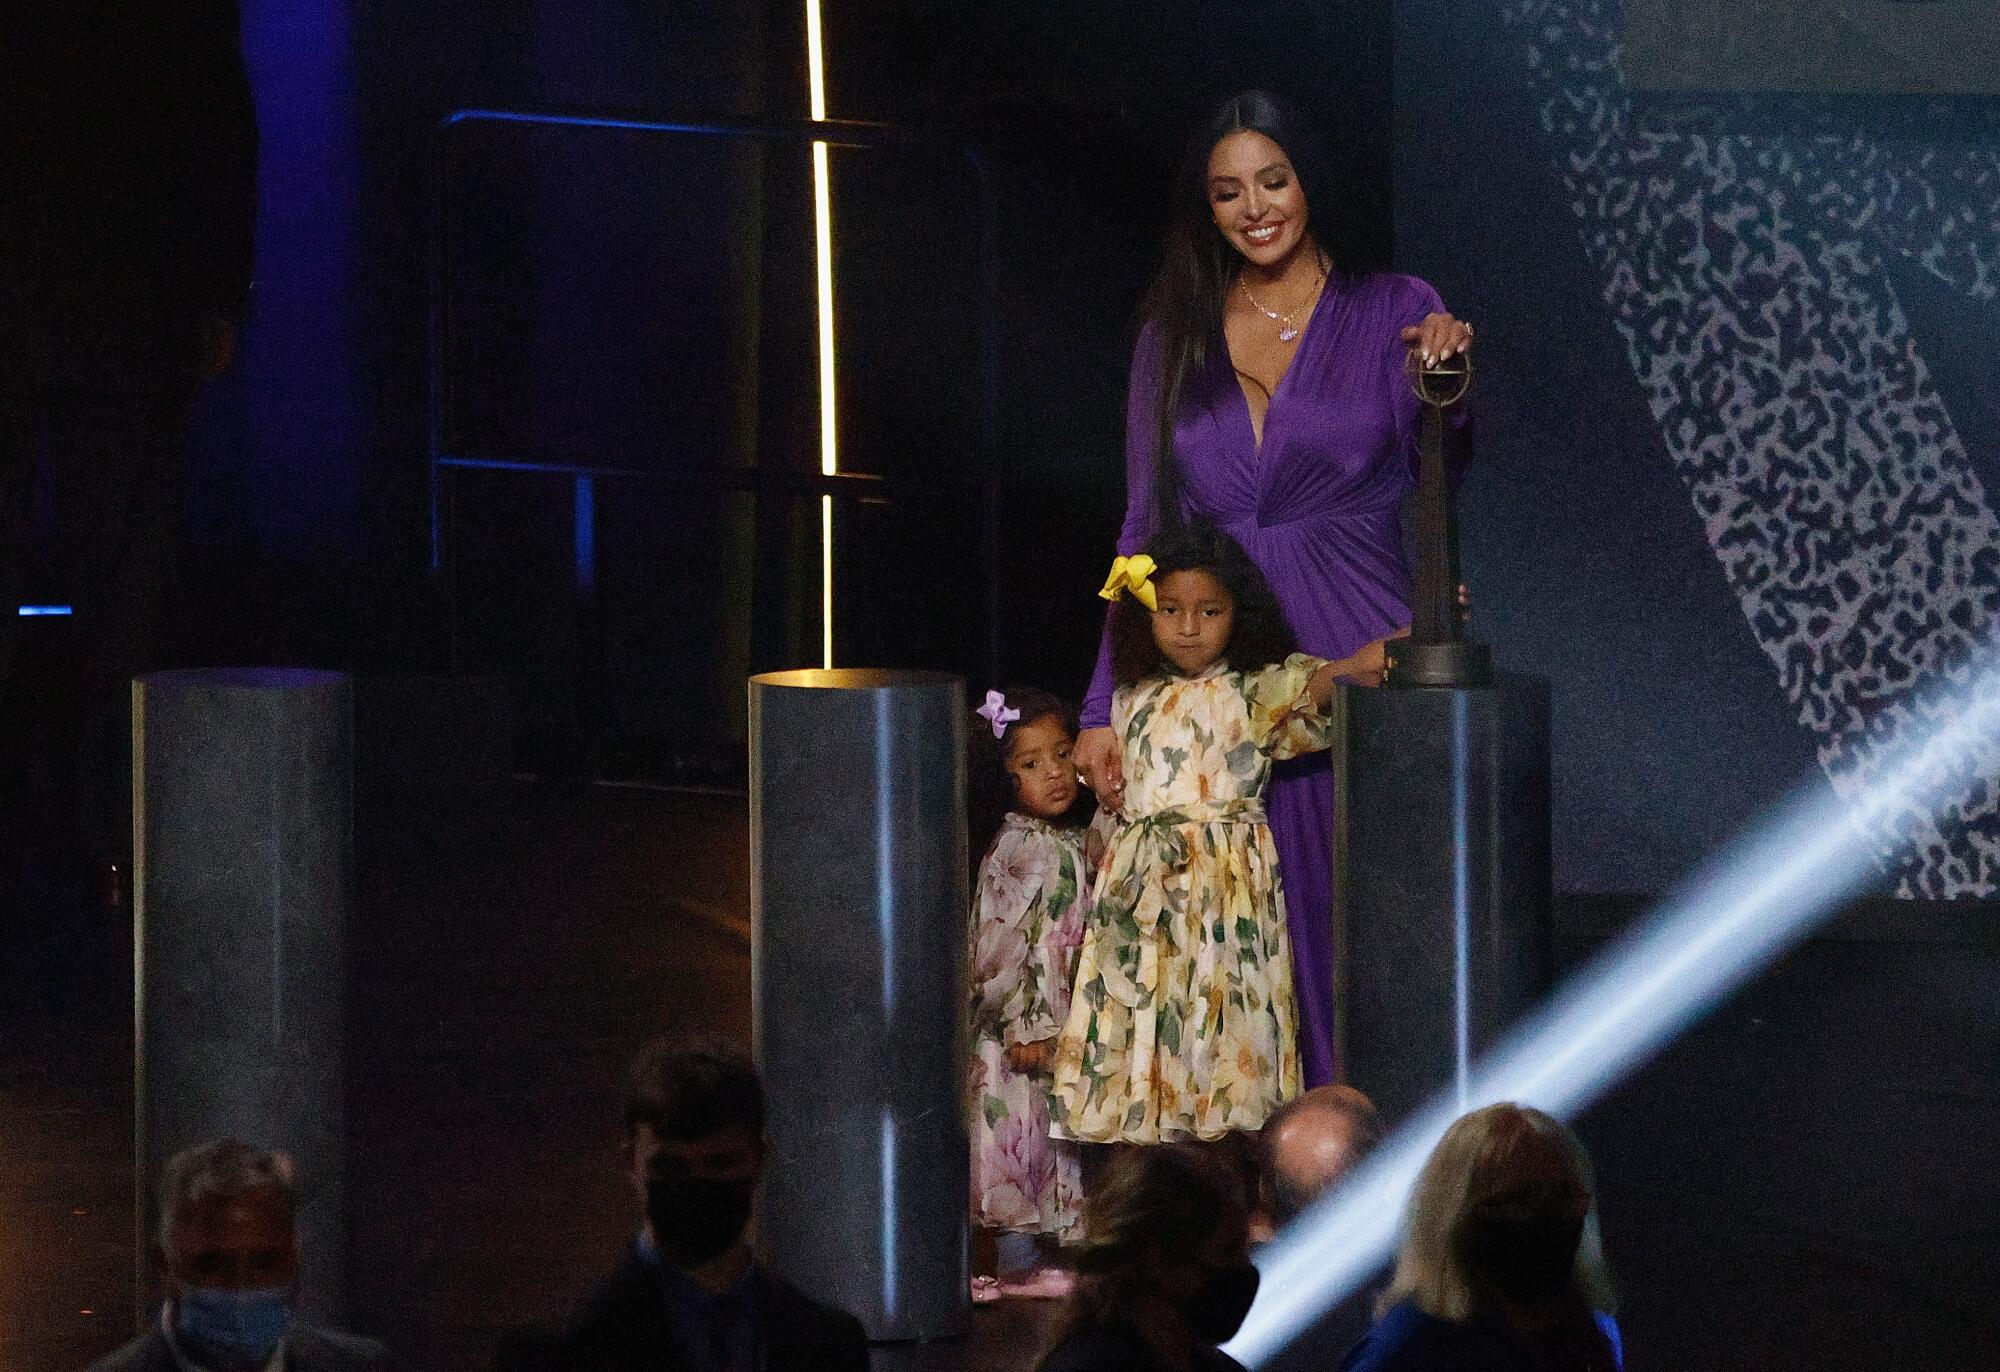 Vanessa Bryant stands with daughters Capri and Bianka at the conclusion of the Hall of Fame induction ceremony.